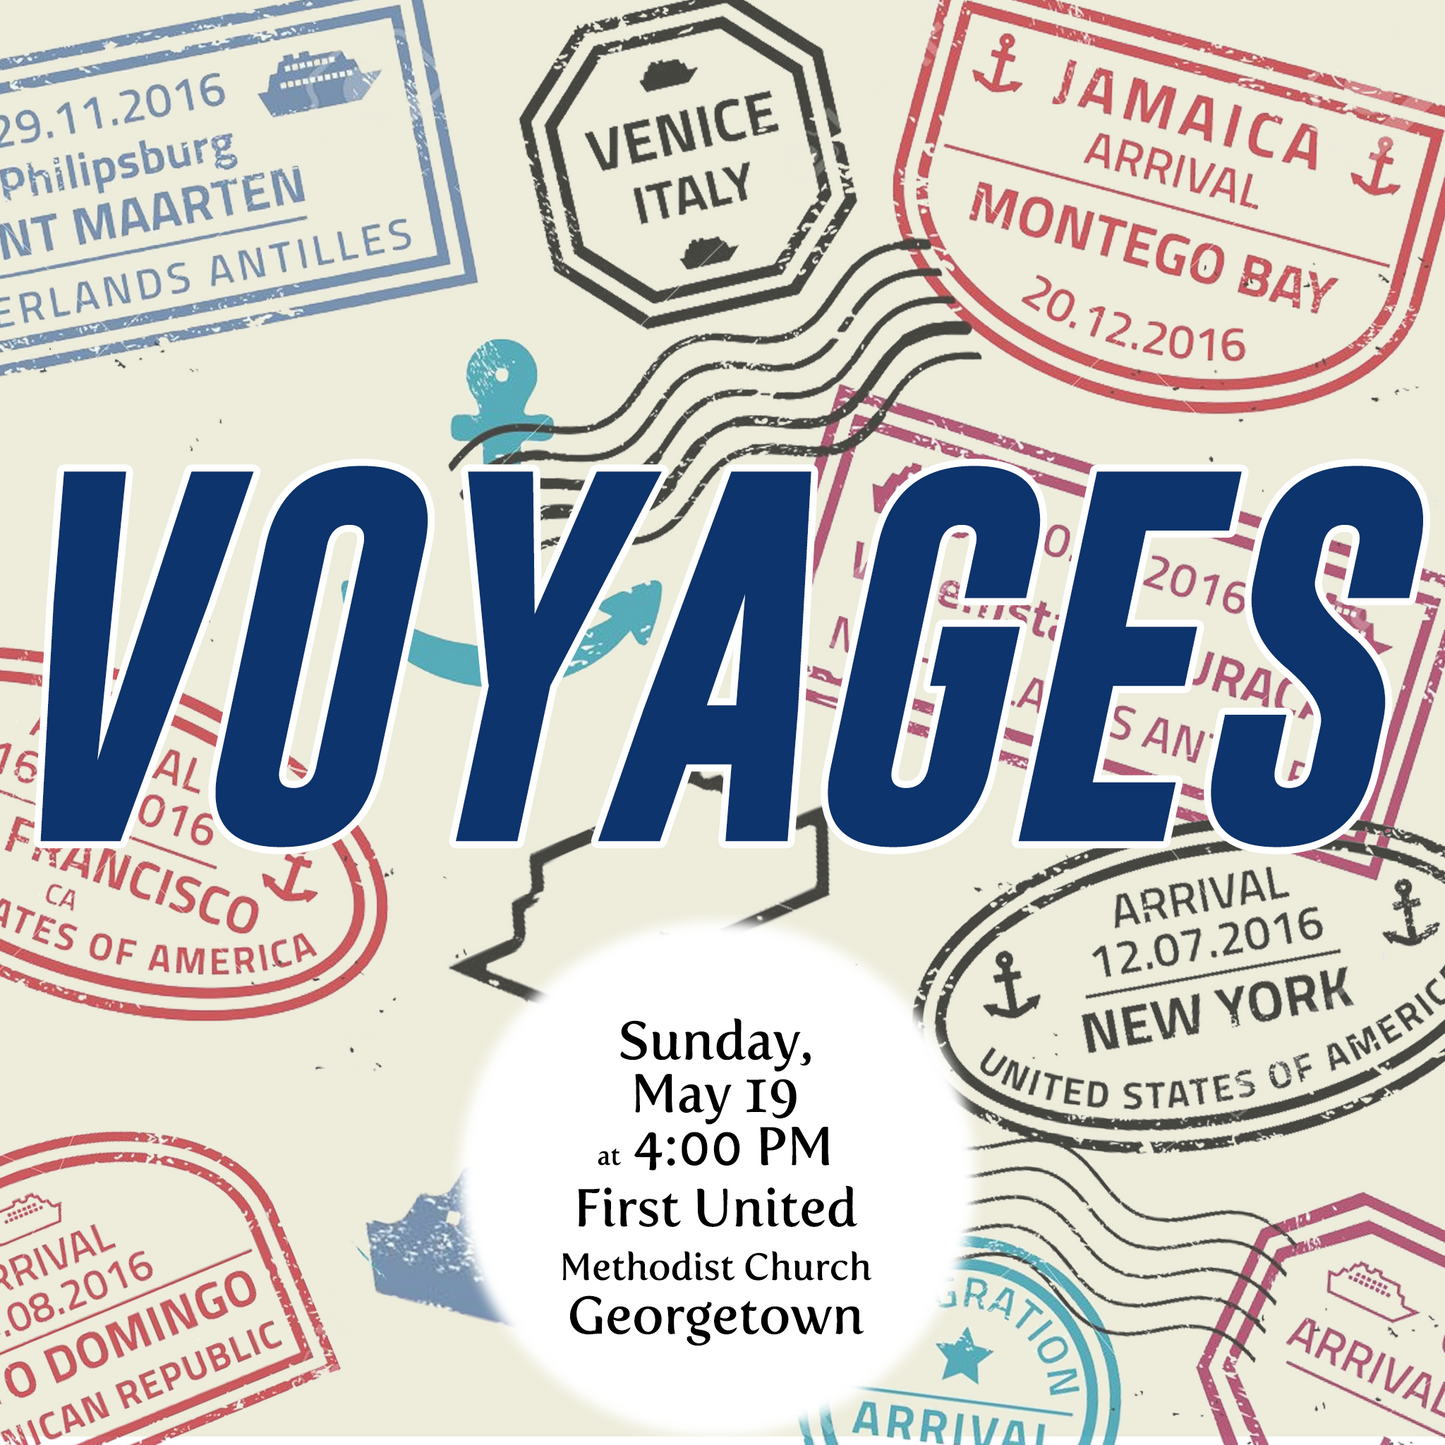 Voyages - Sunday May 19